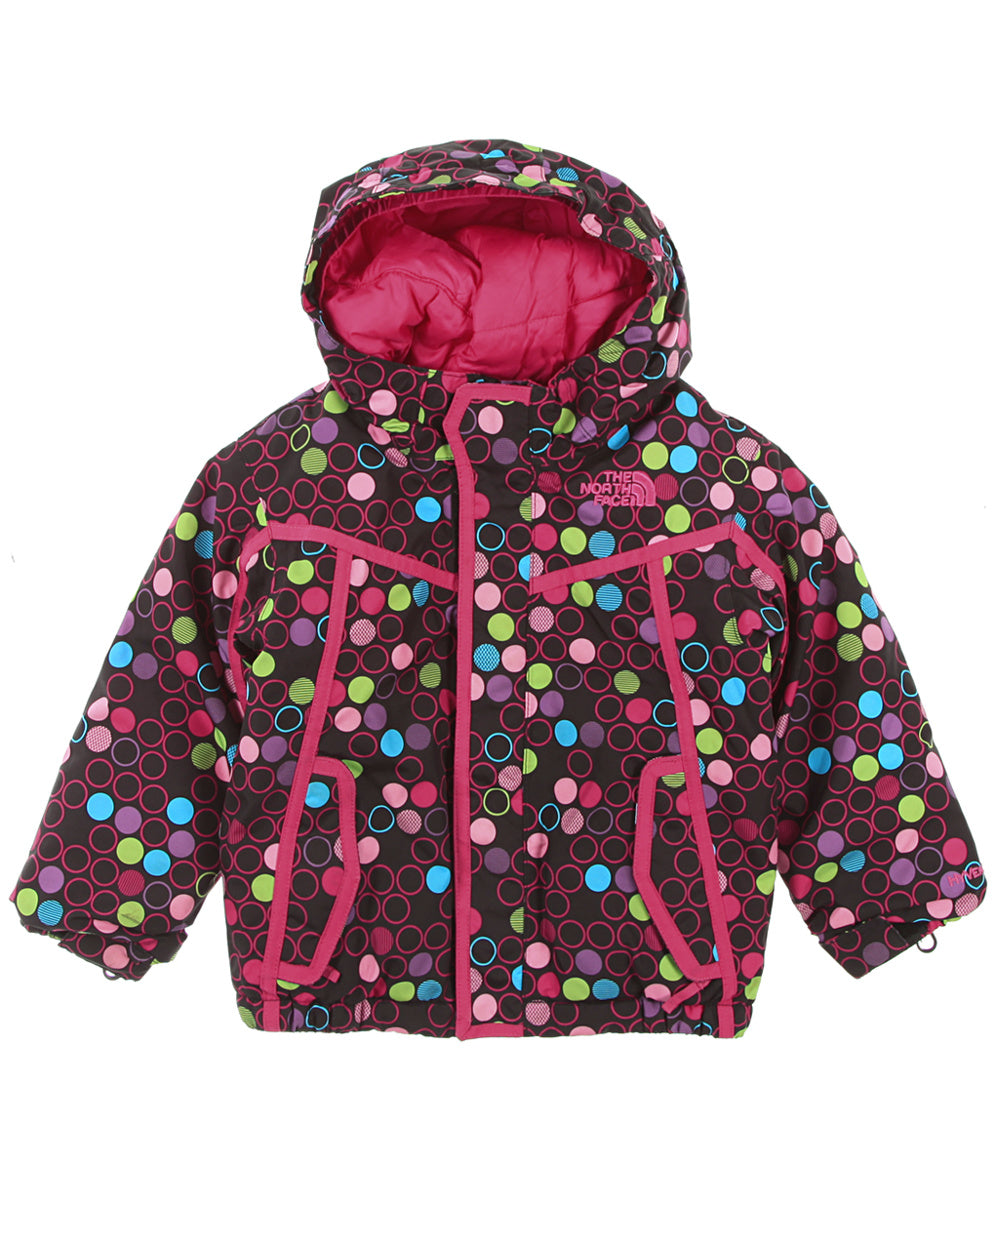 Children's The North Face Pink Spotty Jacket - C28